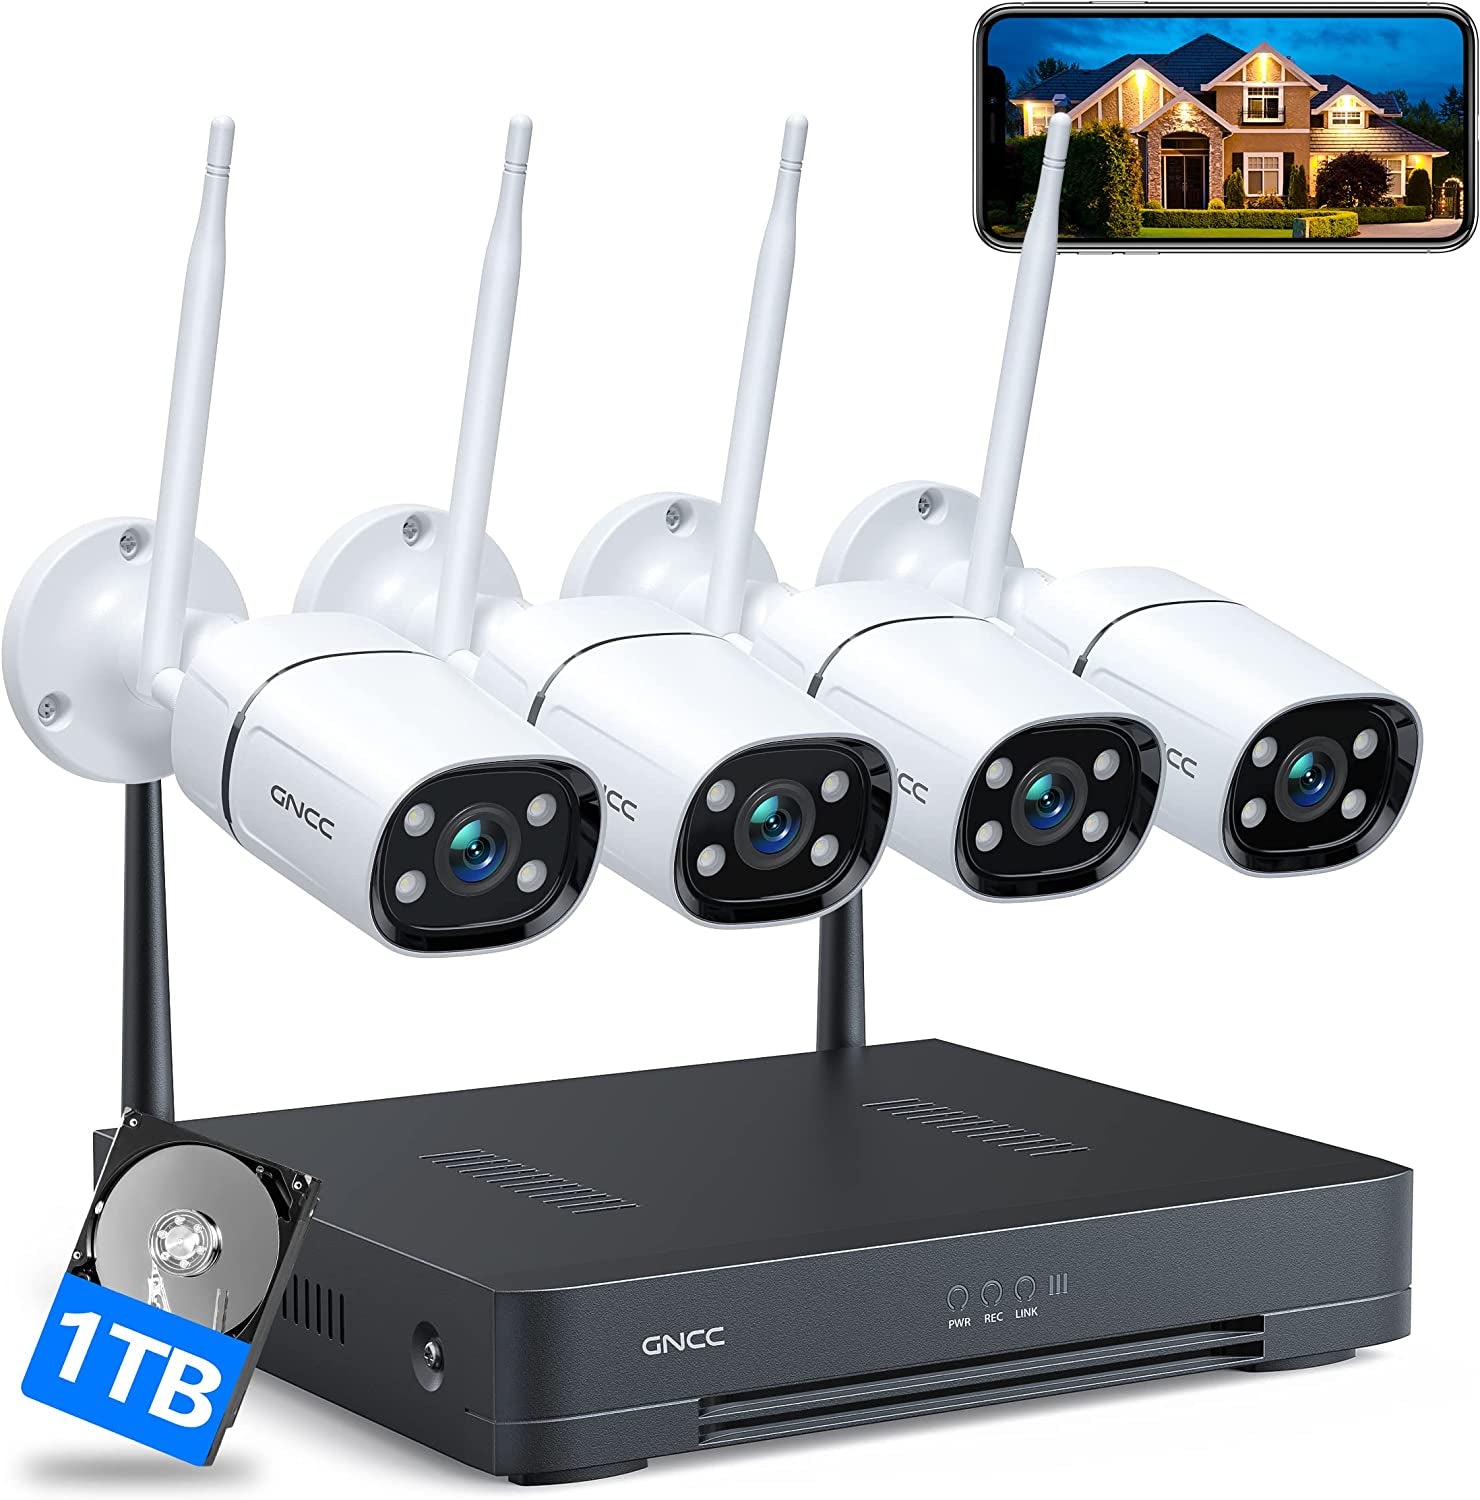 Security Camera System with 1TB HDD Wired, 8CH NVR 4Pcs Home Security Camera Outdoor with AI Face Detection, Color Night Vision, Ip66 Waterproof, Remote Access